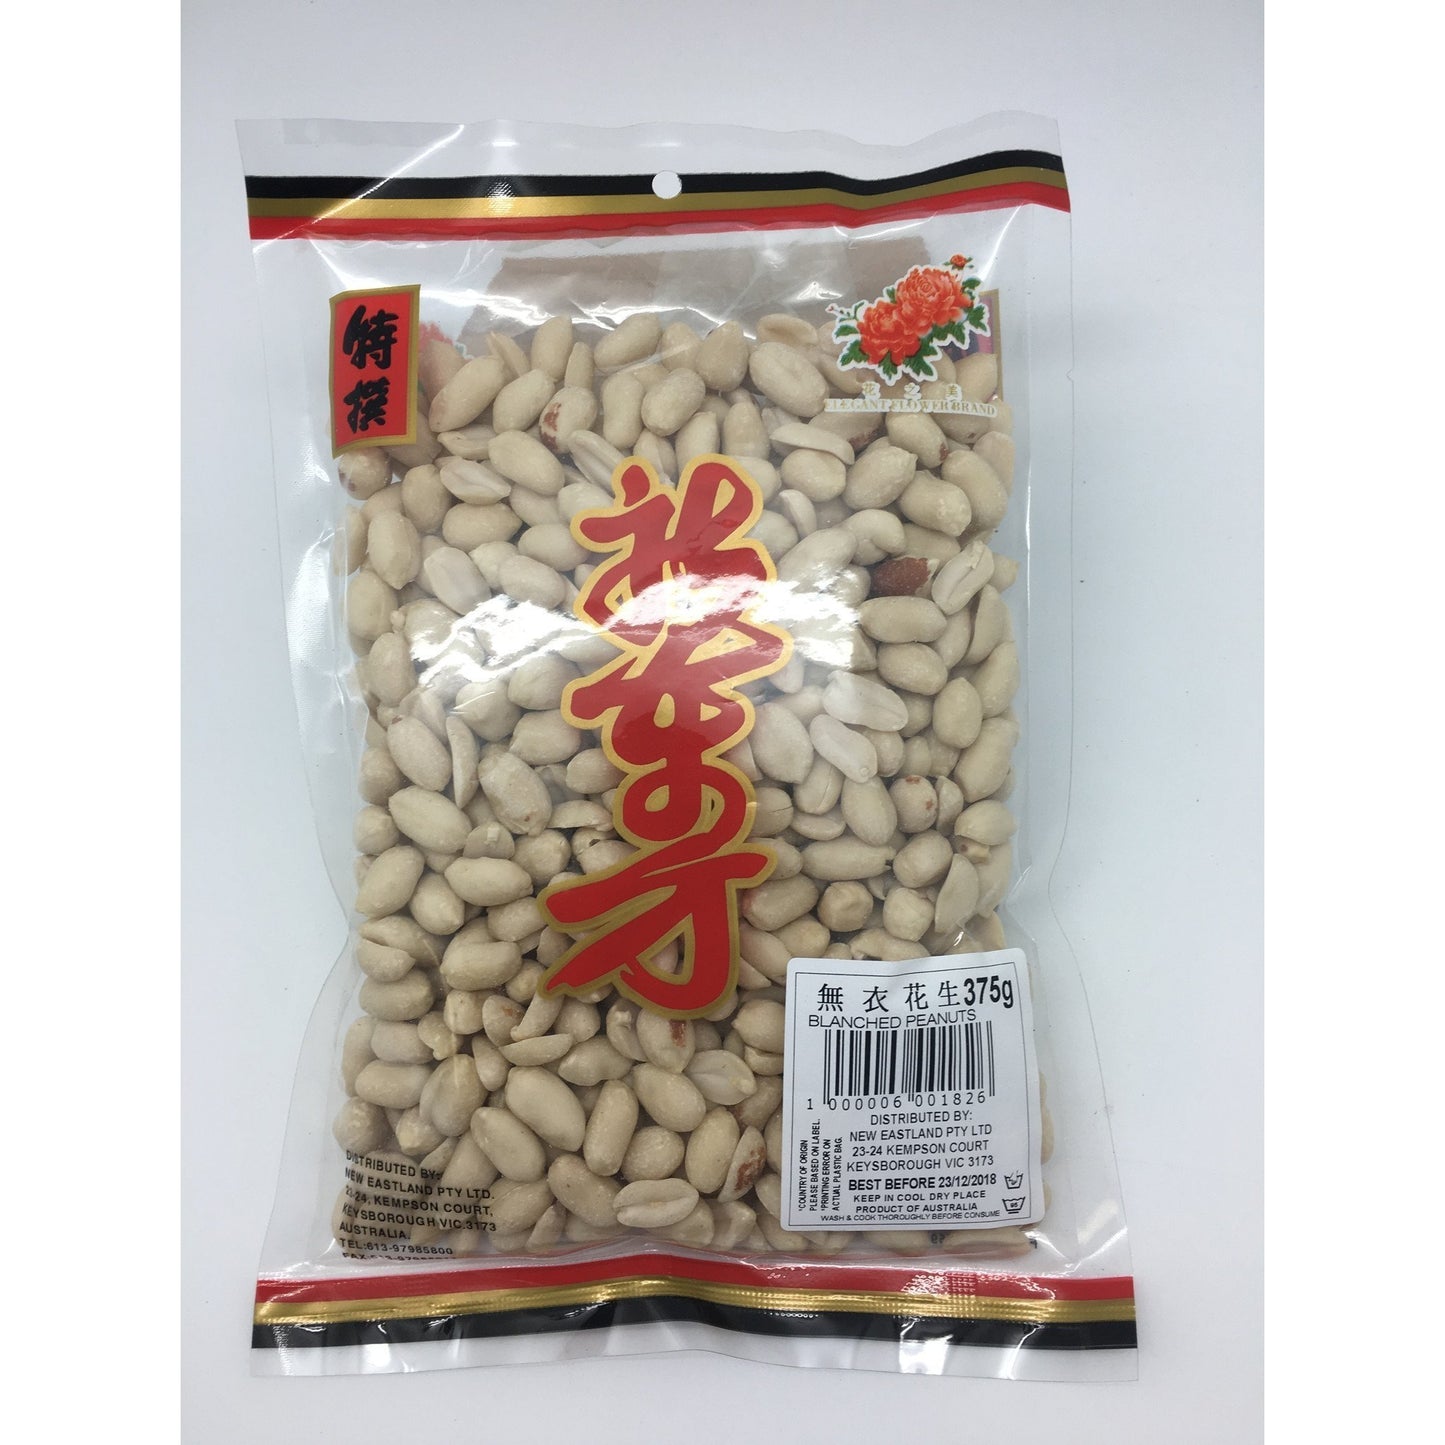 D182S New Eastland Brand - Blanched Peanuts 375g - 40 bags / 1 CTN - New Eastland Pty Ltd - Asian food wholesalers